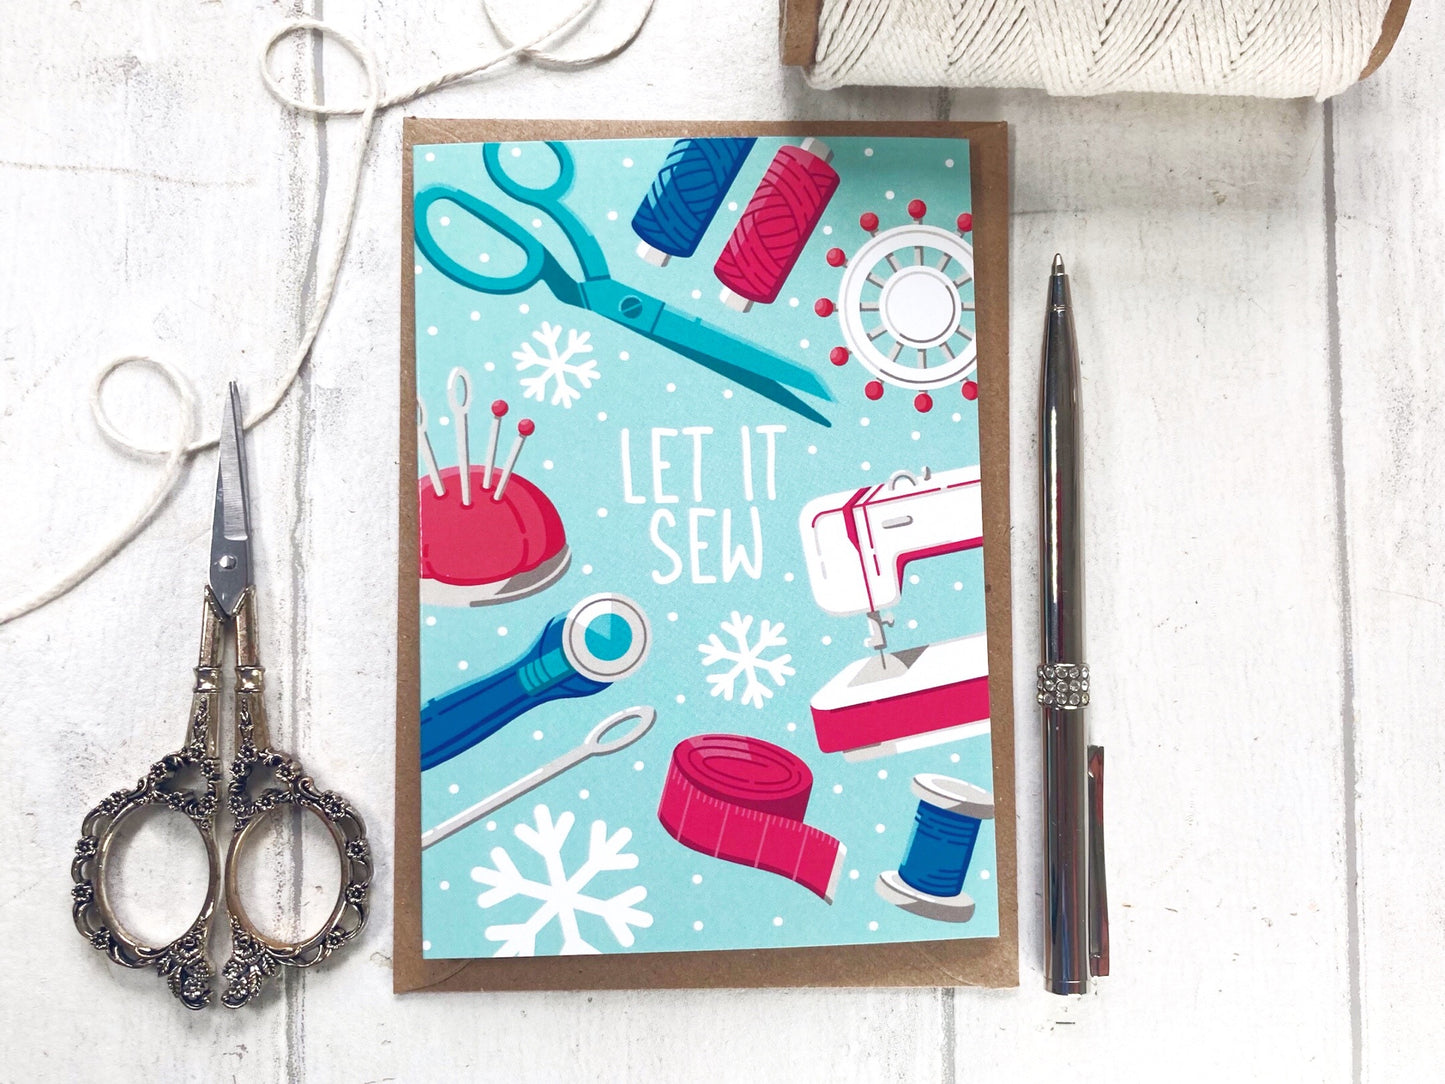 Xmas Sew - A6 Greetings Card by Little Green Stitches